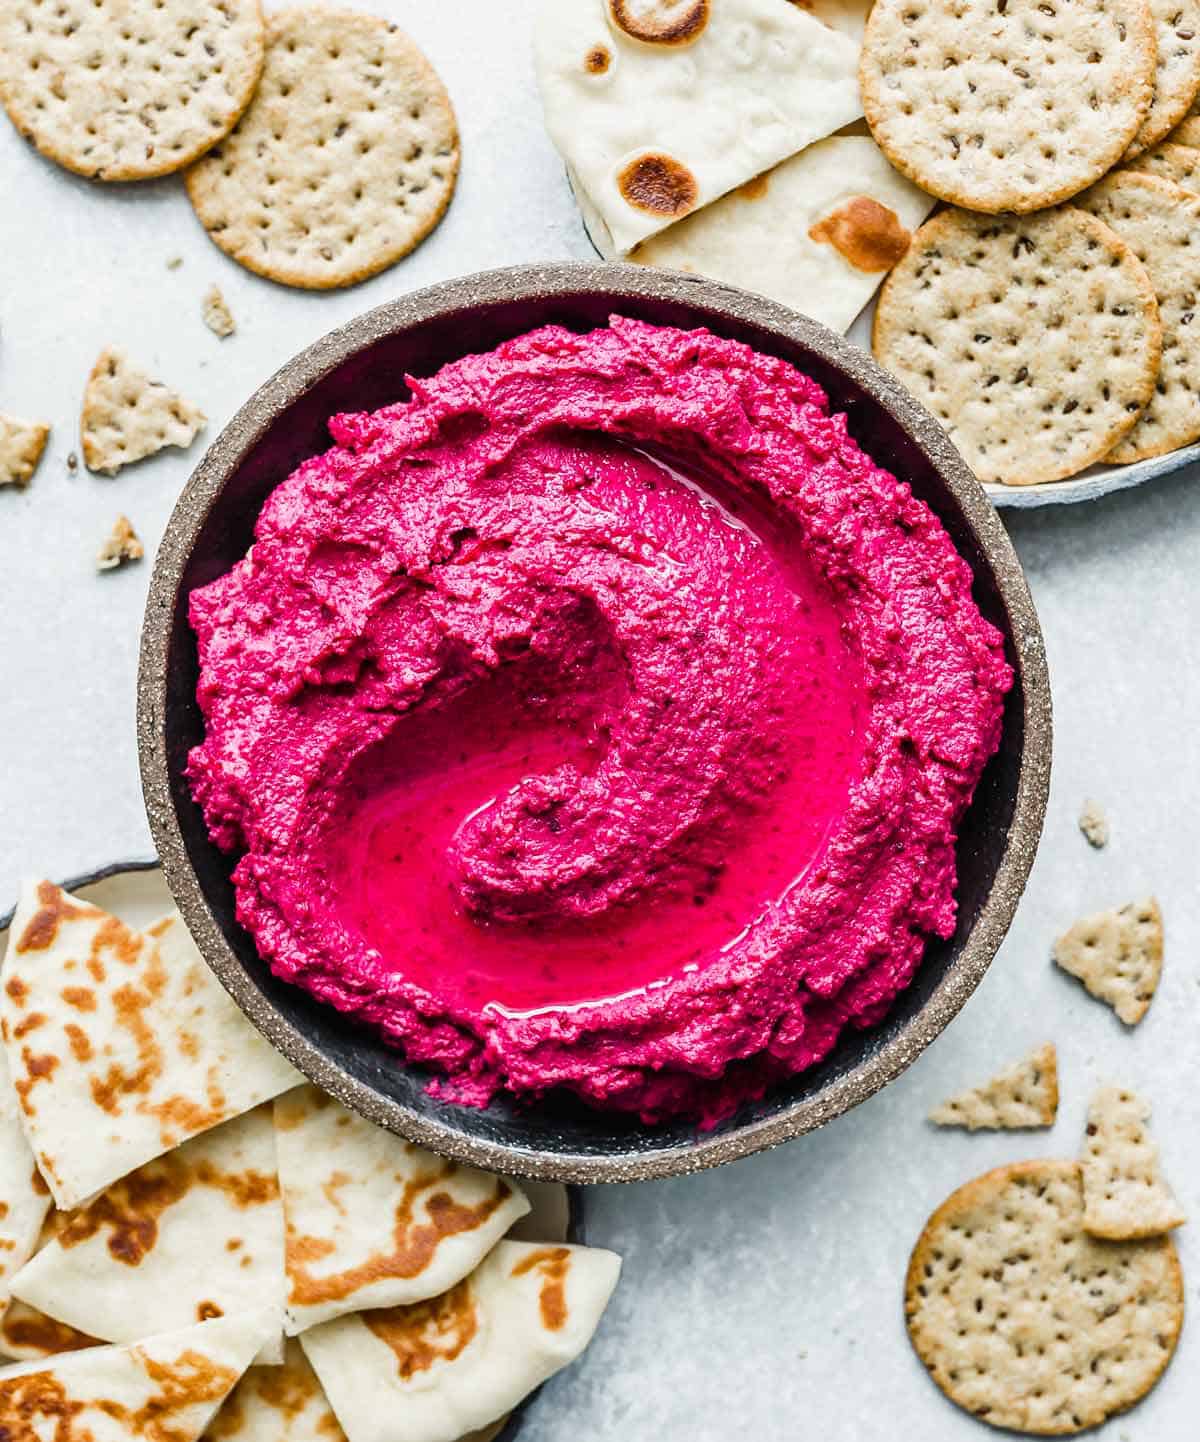 Beet Hummus in a round bowl surrounded by naan and crackers.